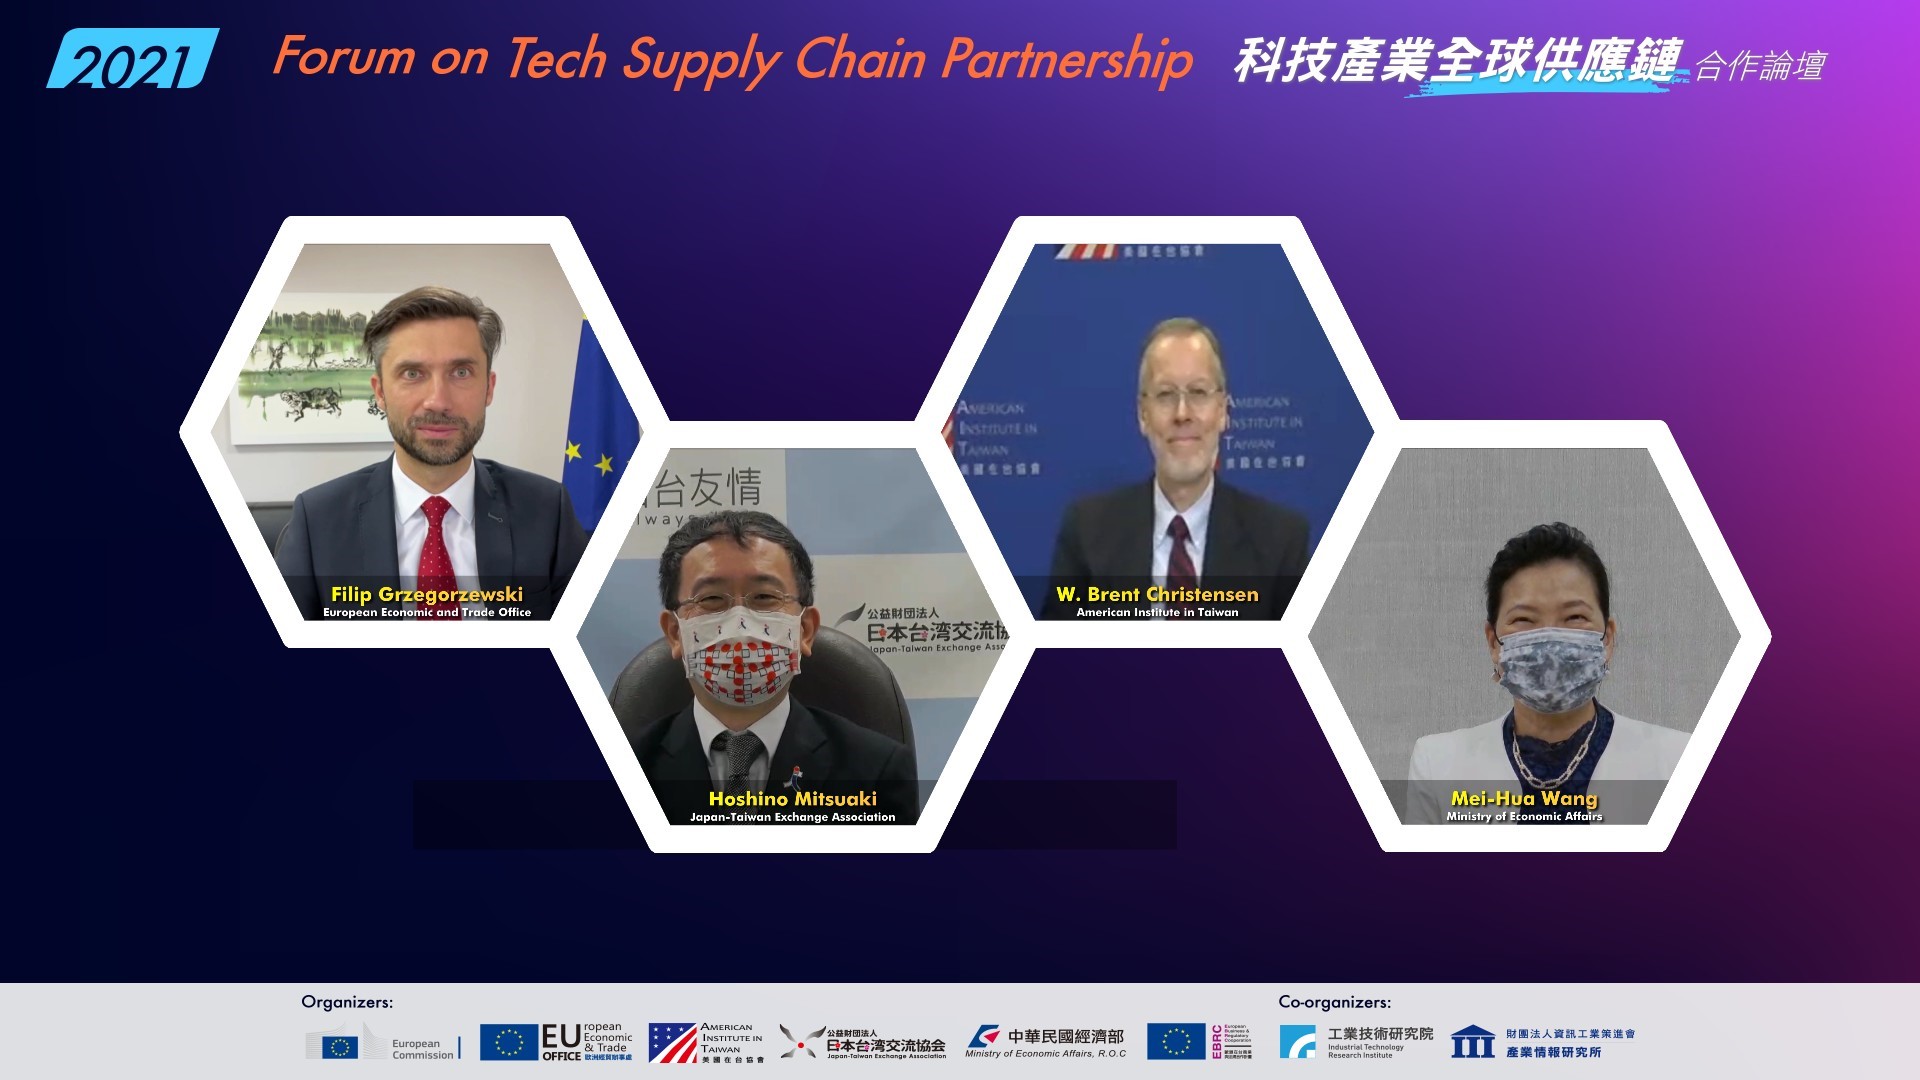  Forum on Tech Supply Chain Partnership was held on June 22 in Taipei. (Source from EETO)